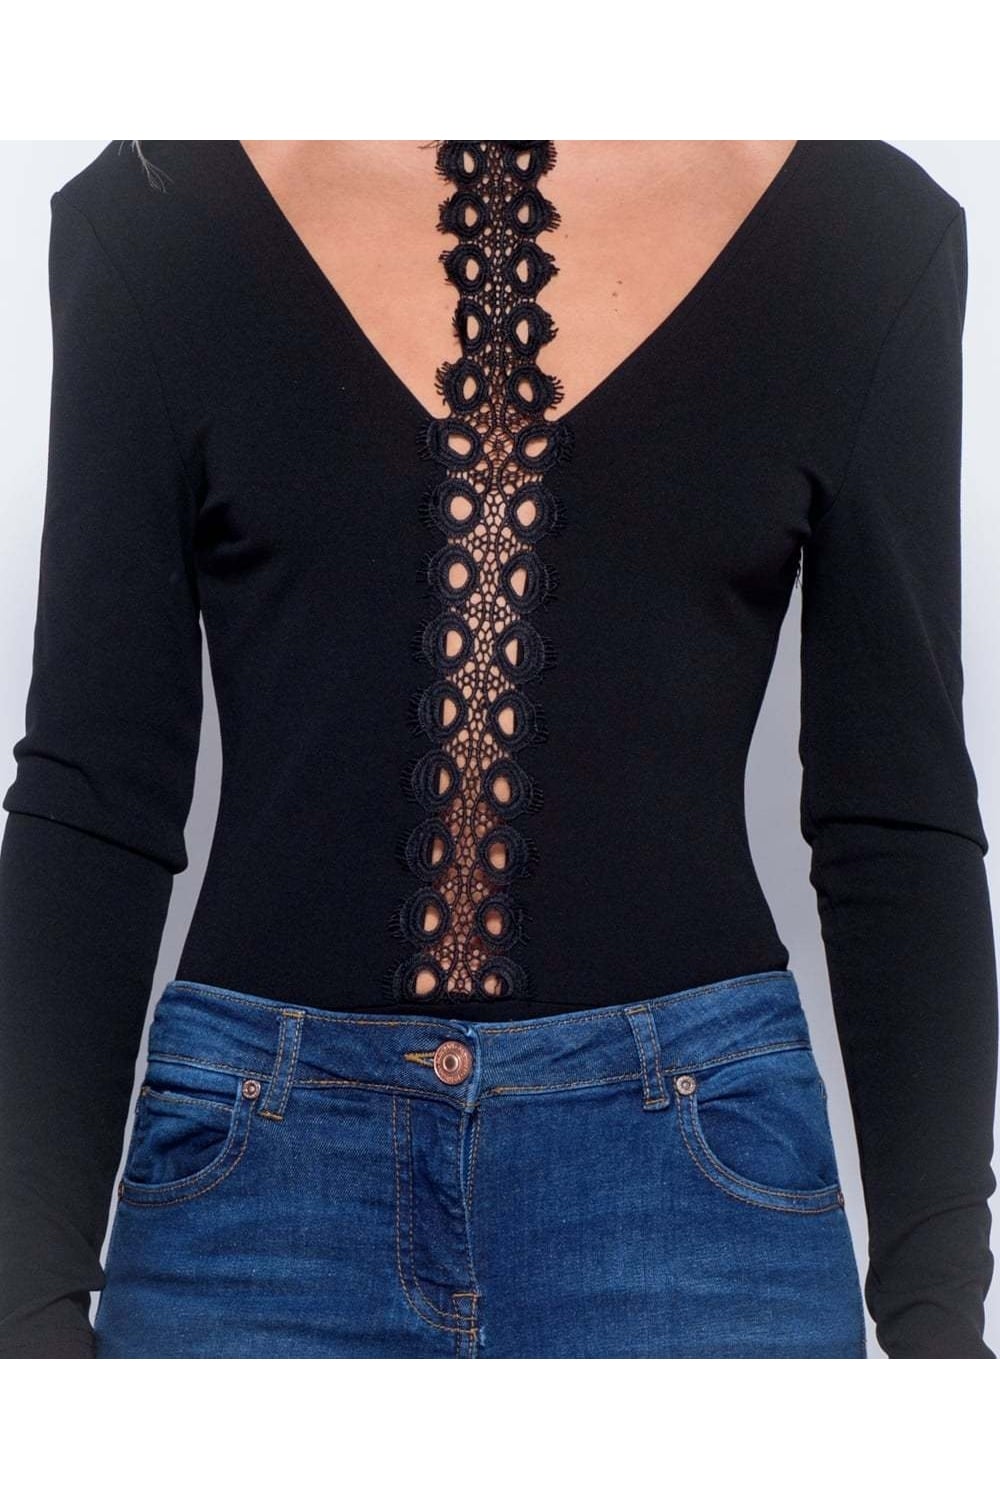 Lace Choker Deep V-Neck Bodysuit in Black - Close up material look